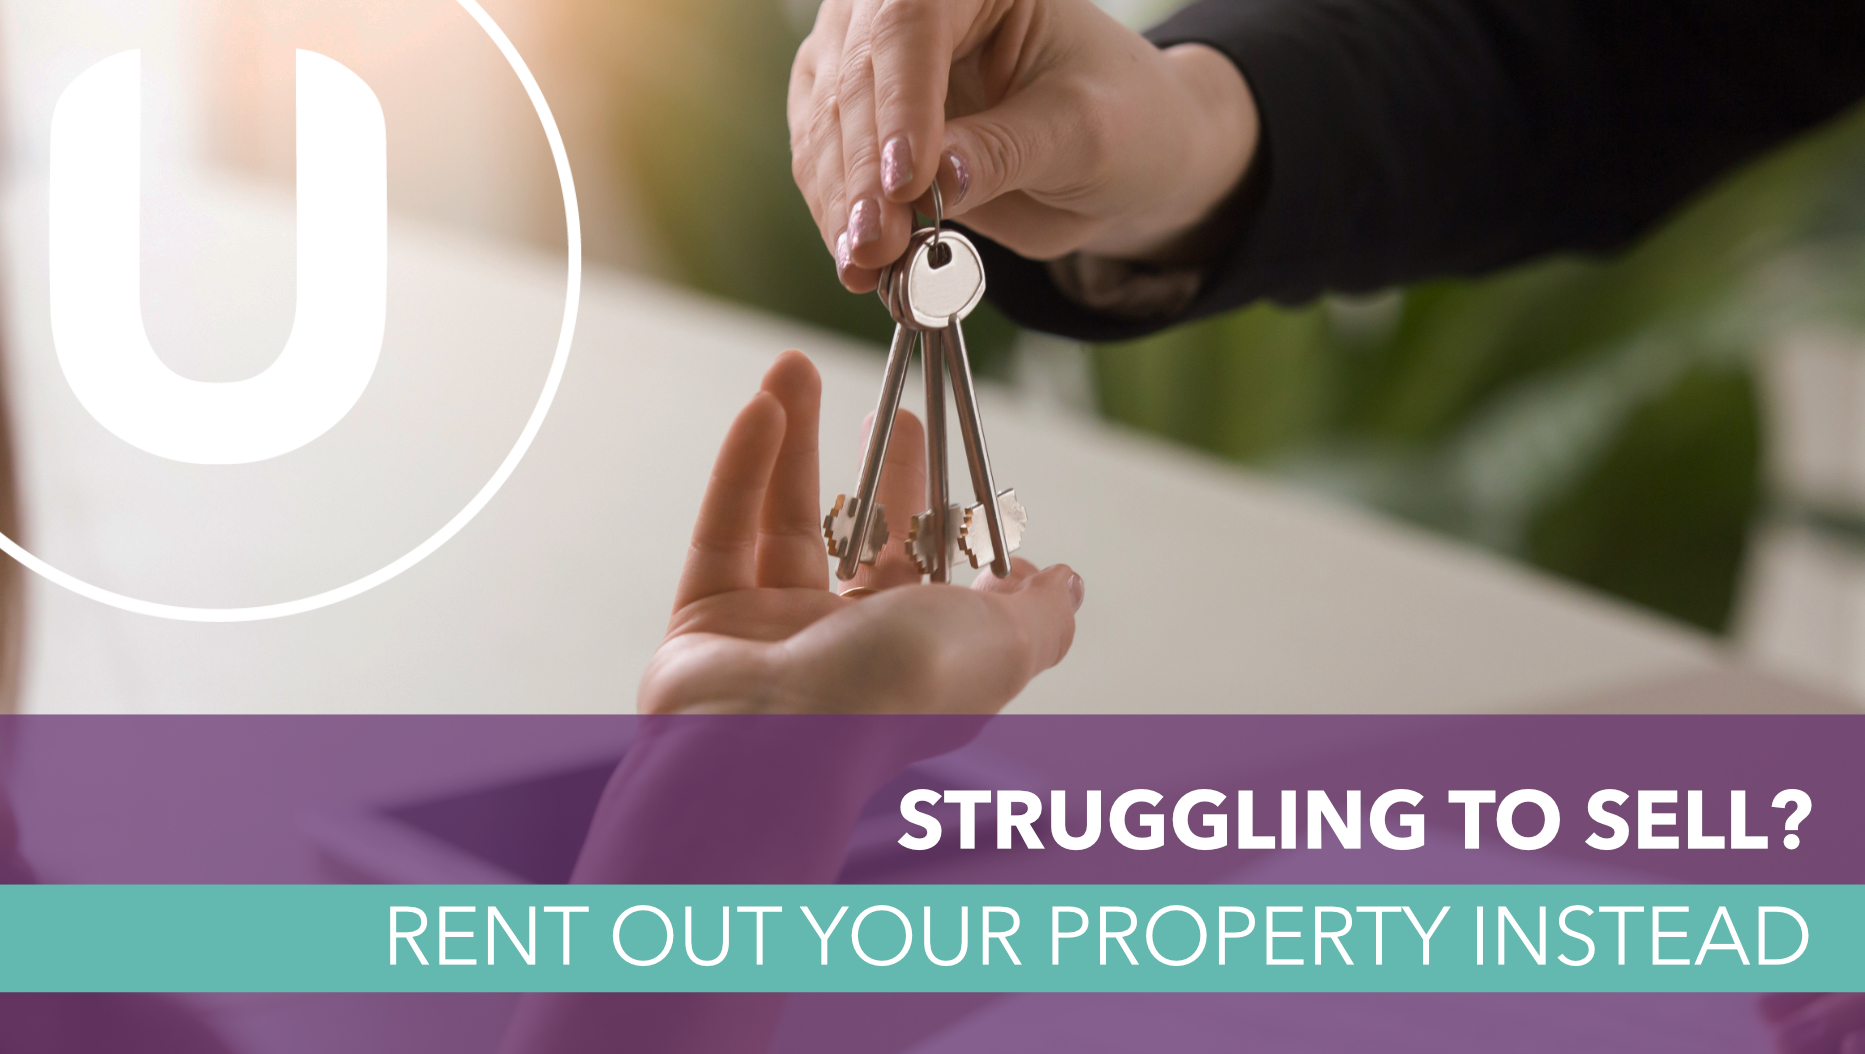 Struggling to sell? Rent out your property instead